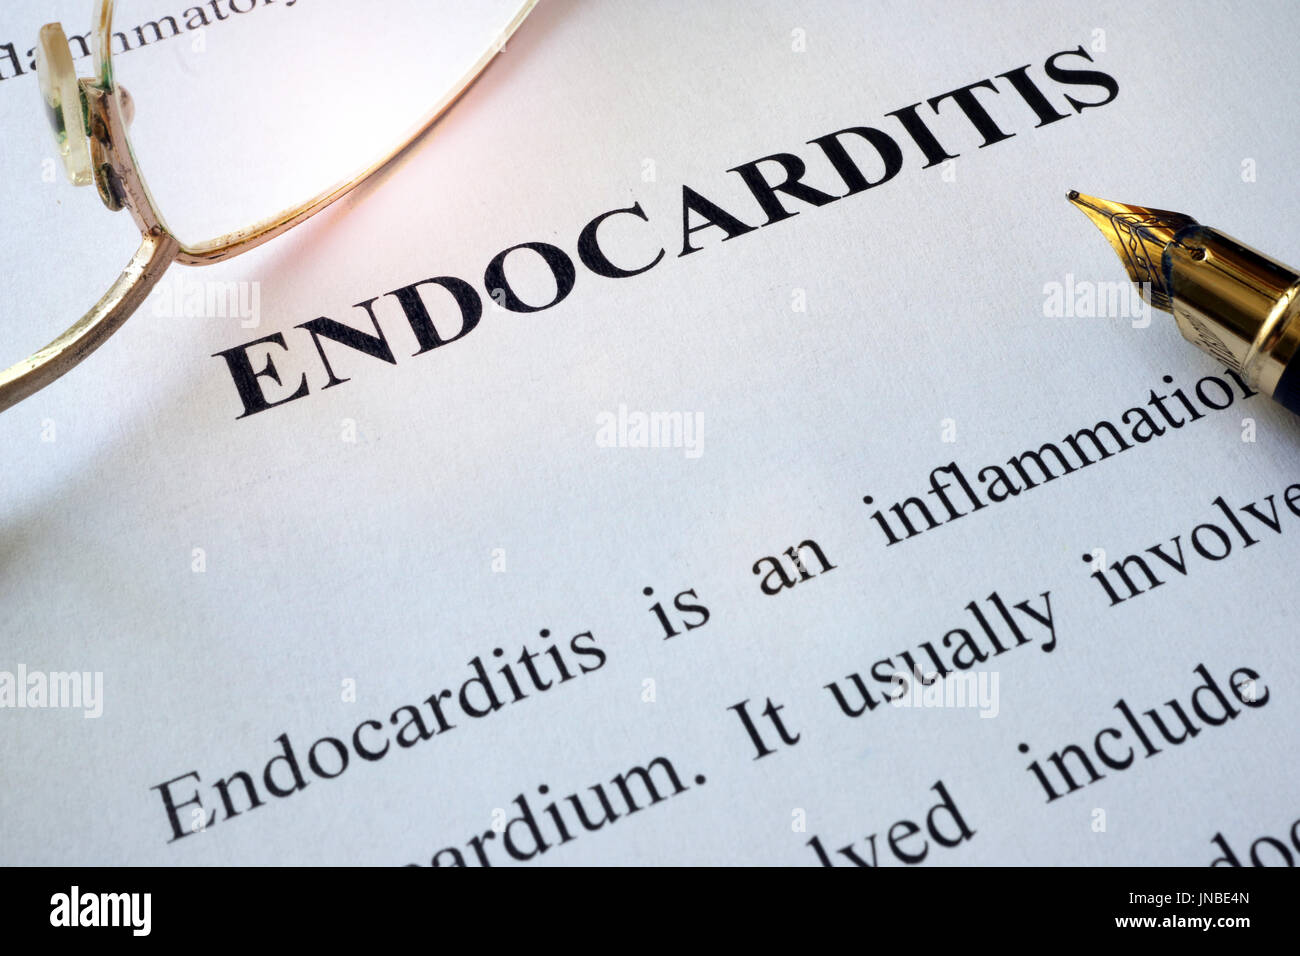 Paper with word endocarditis and glasses. Stock Photo